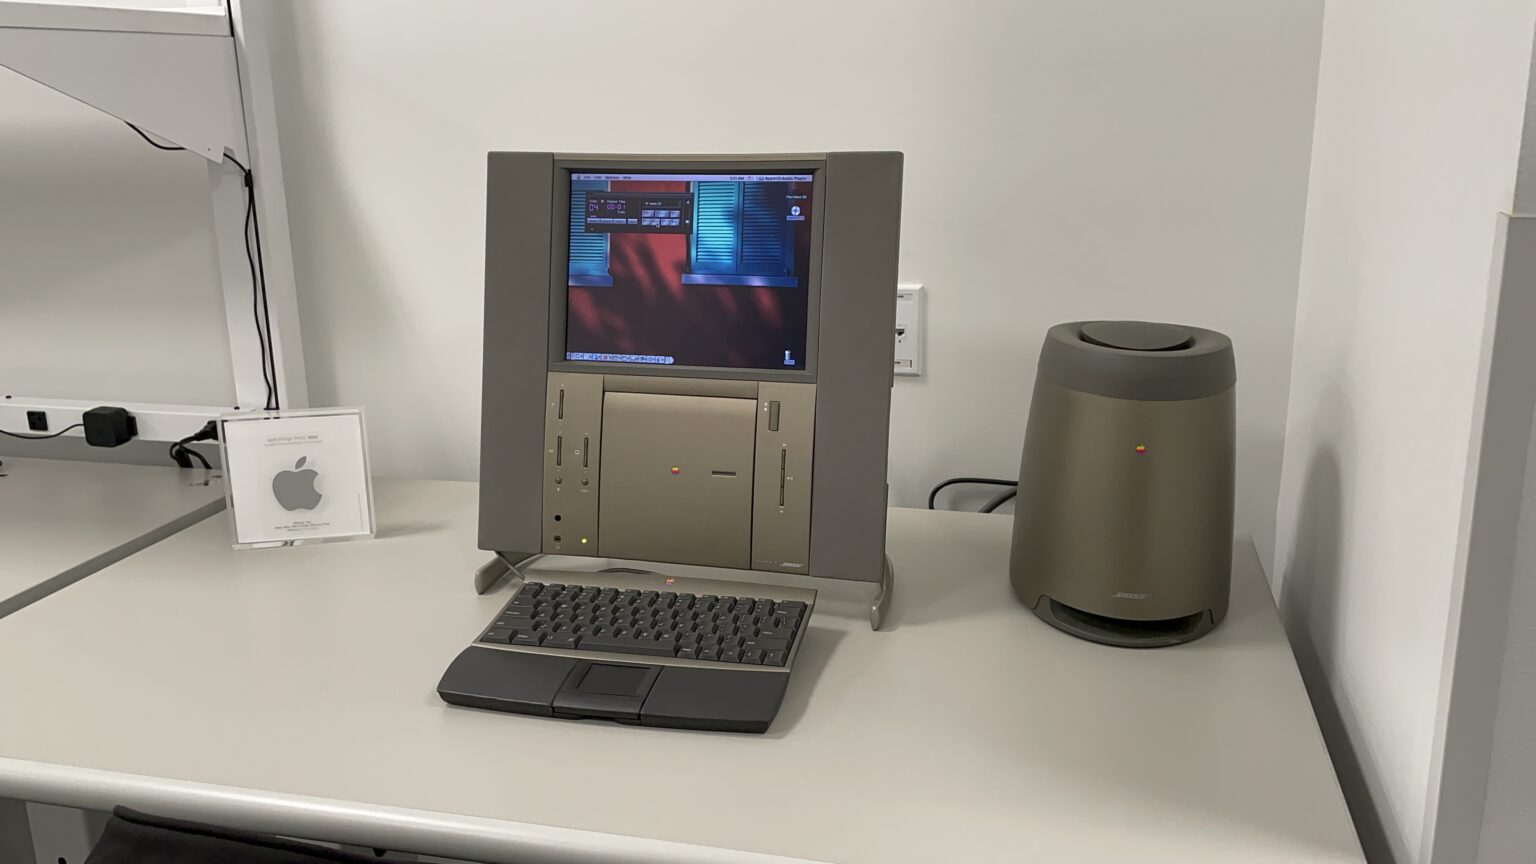 An unexpected find in this room was a Twentieth Anniversary Macintosh.